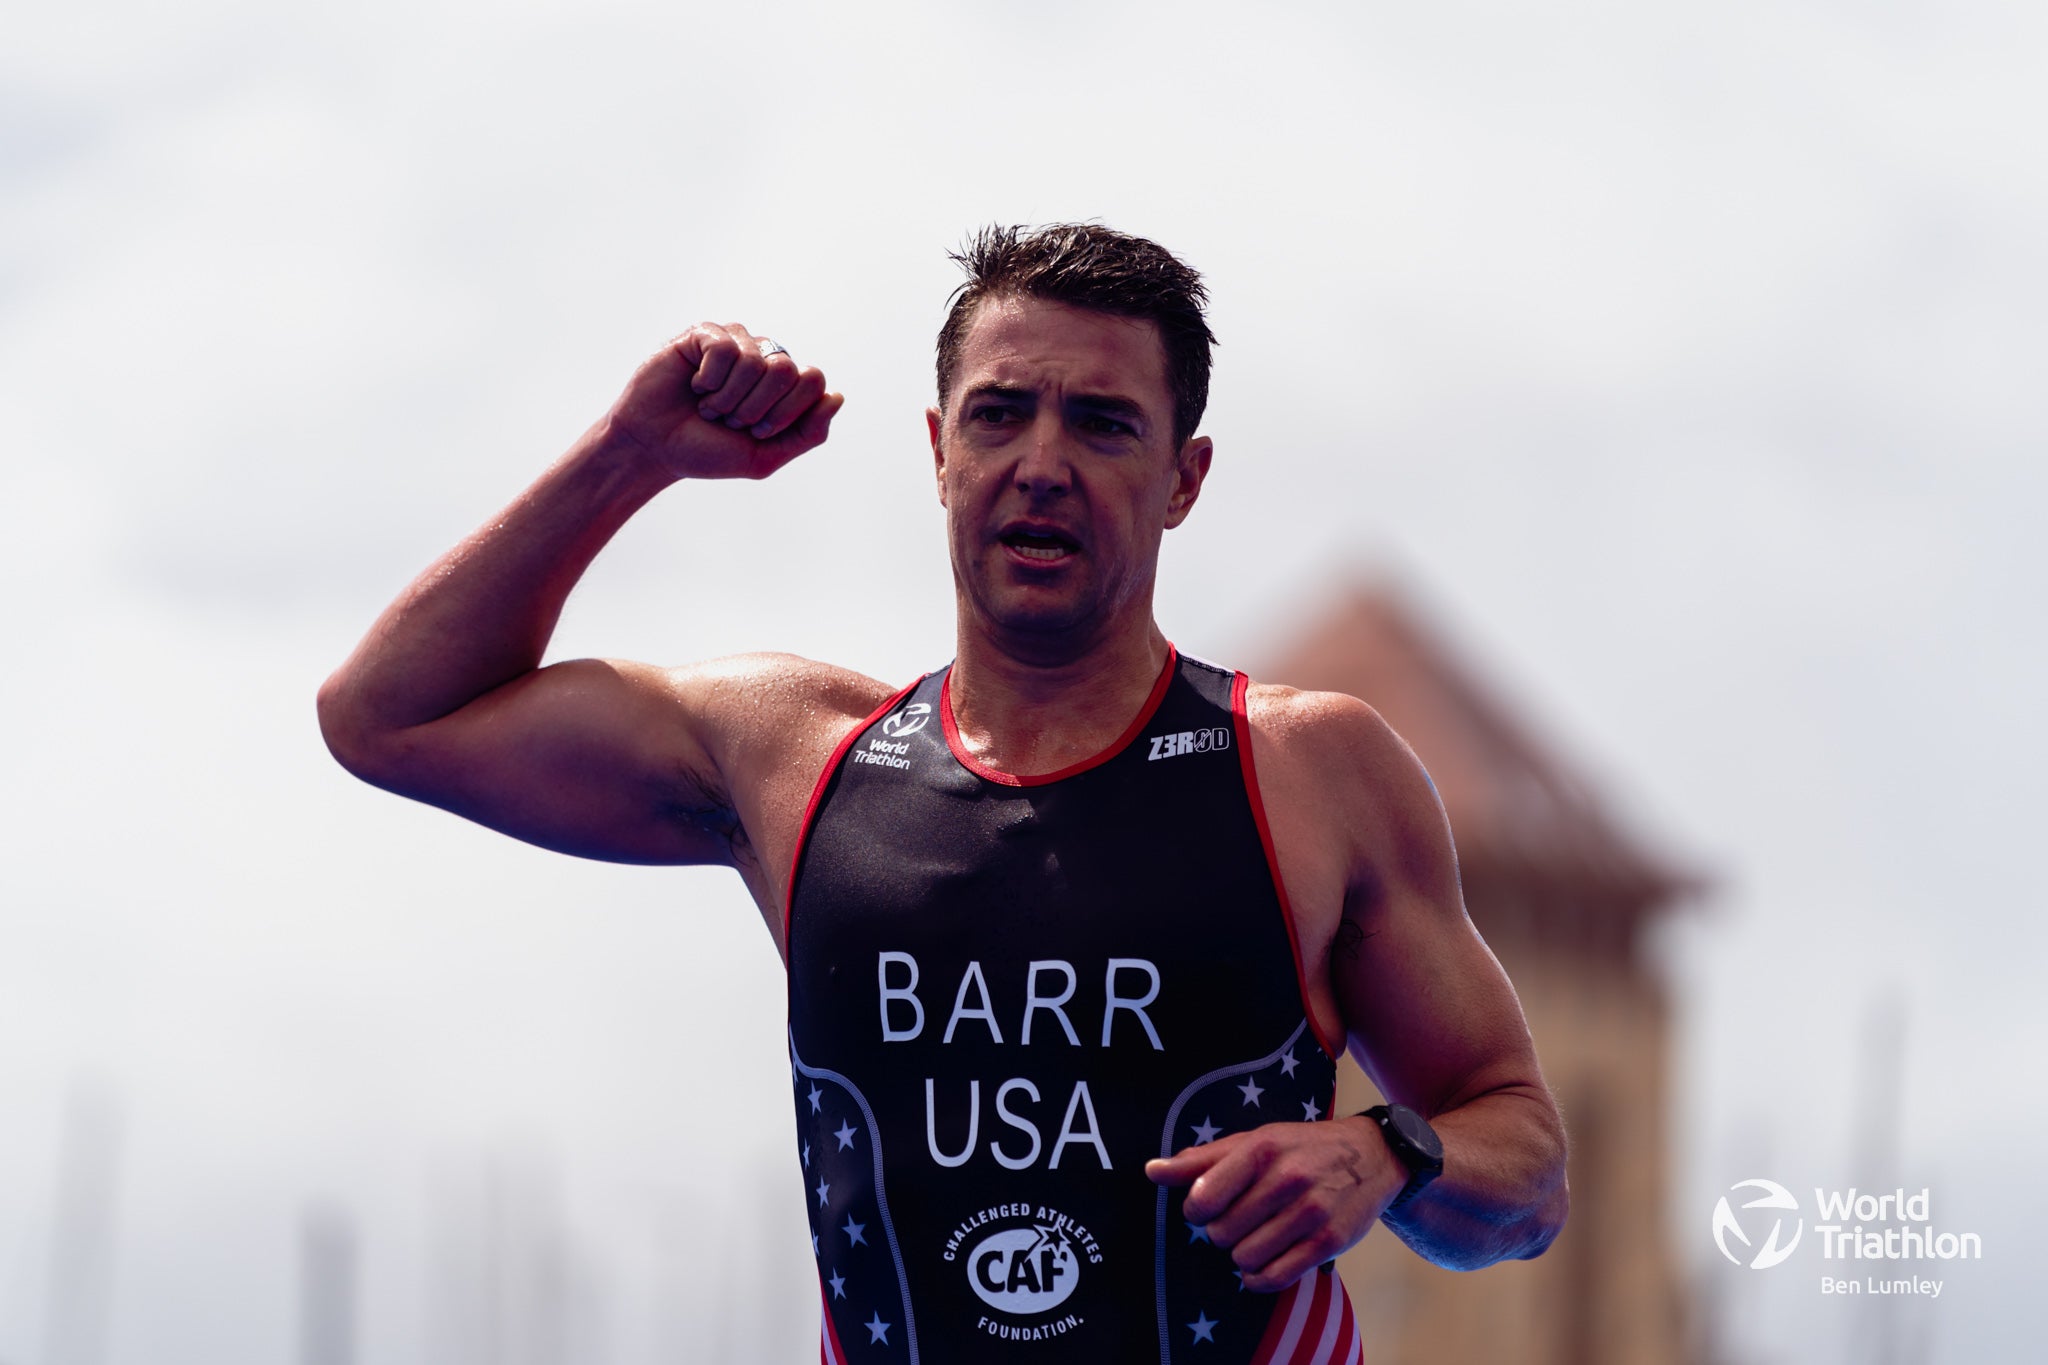 Mark Barr is also a 2008 and 2012 U.S. Paralympian in swimming.